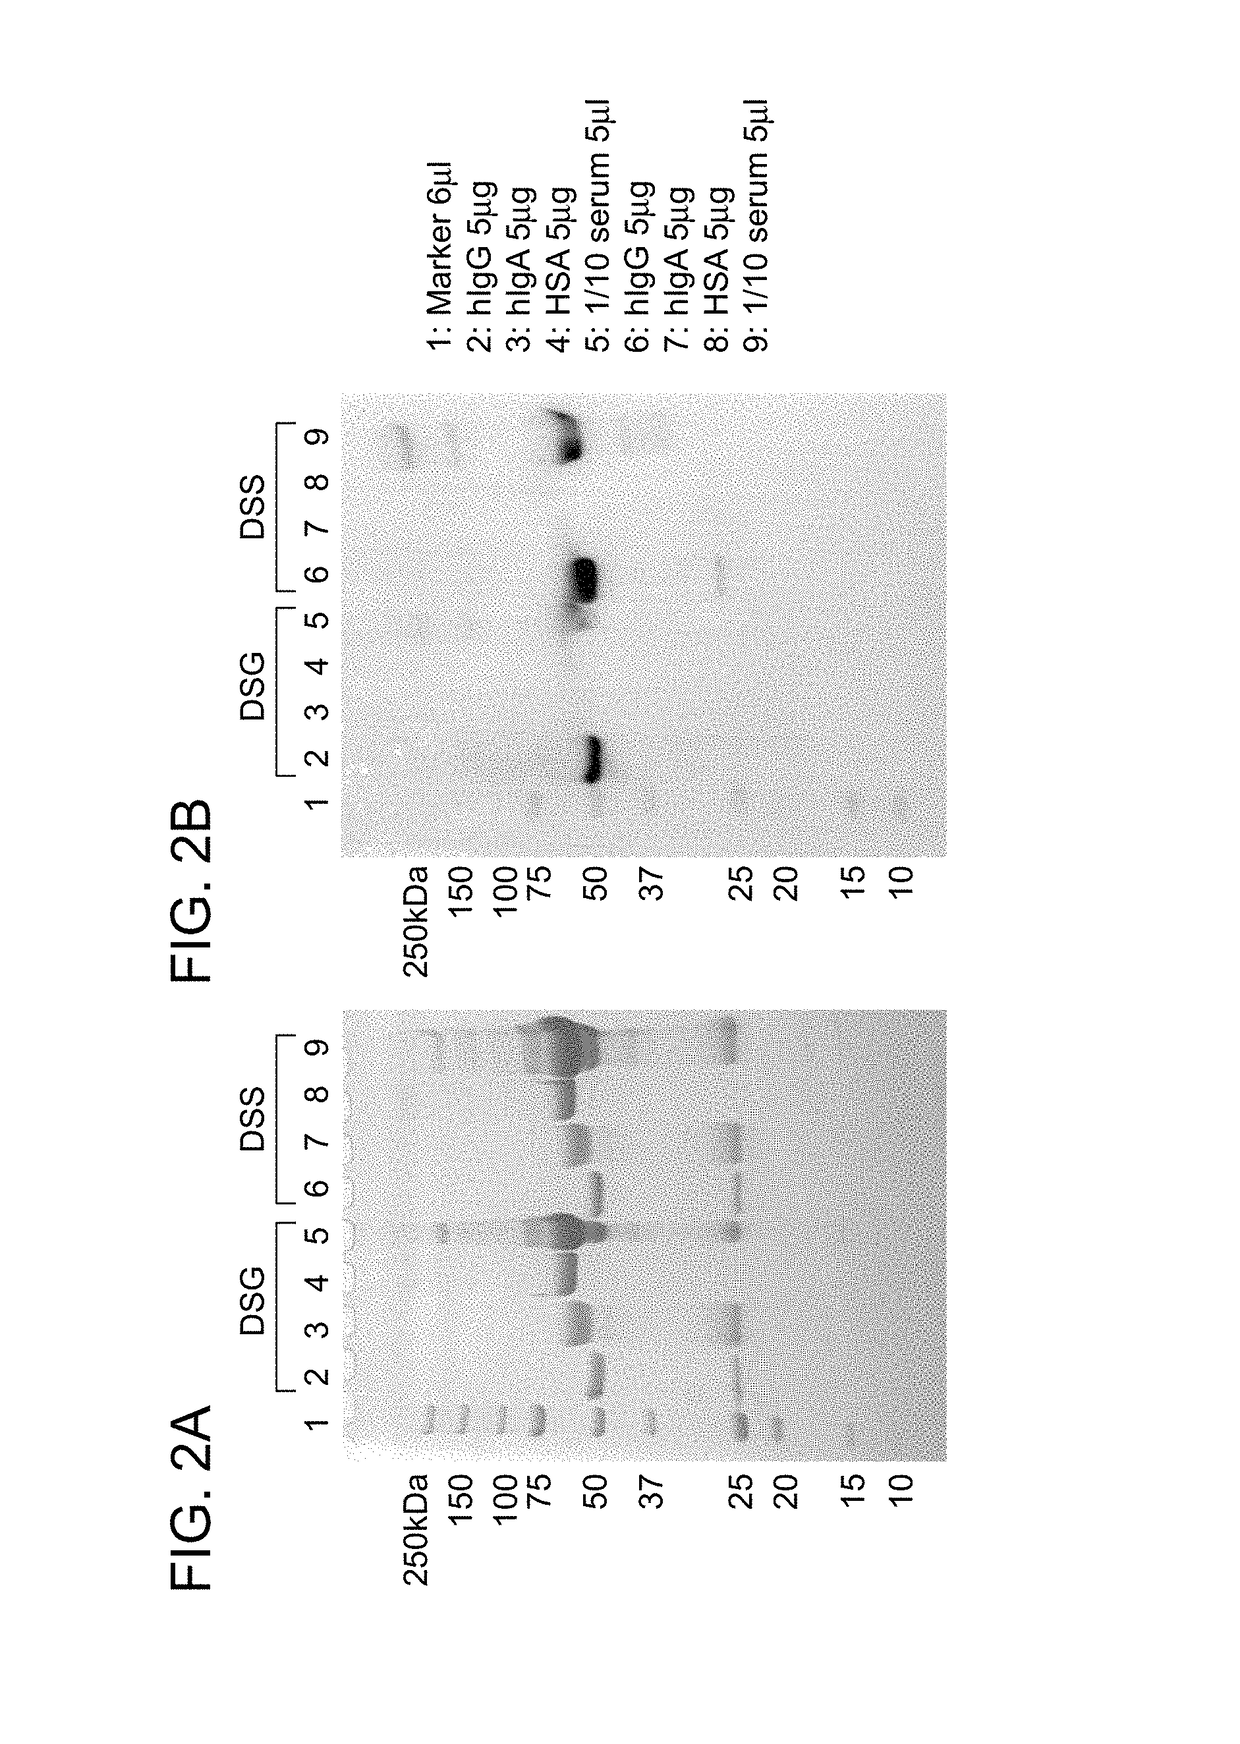 Specific modification of antibody with IgG-binding peptide